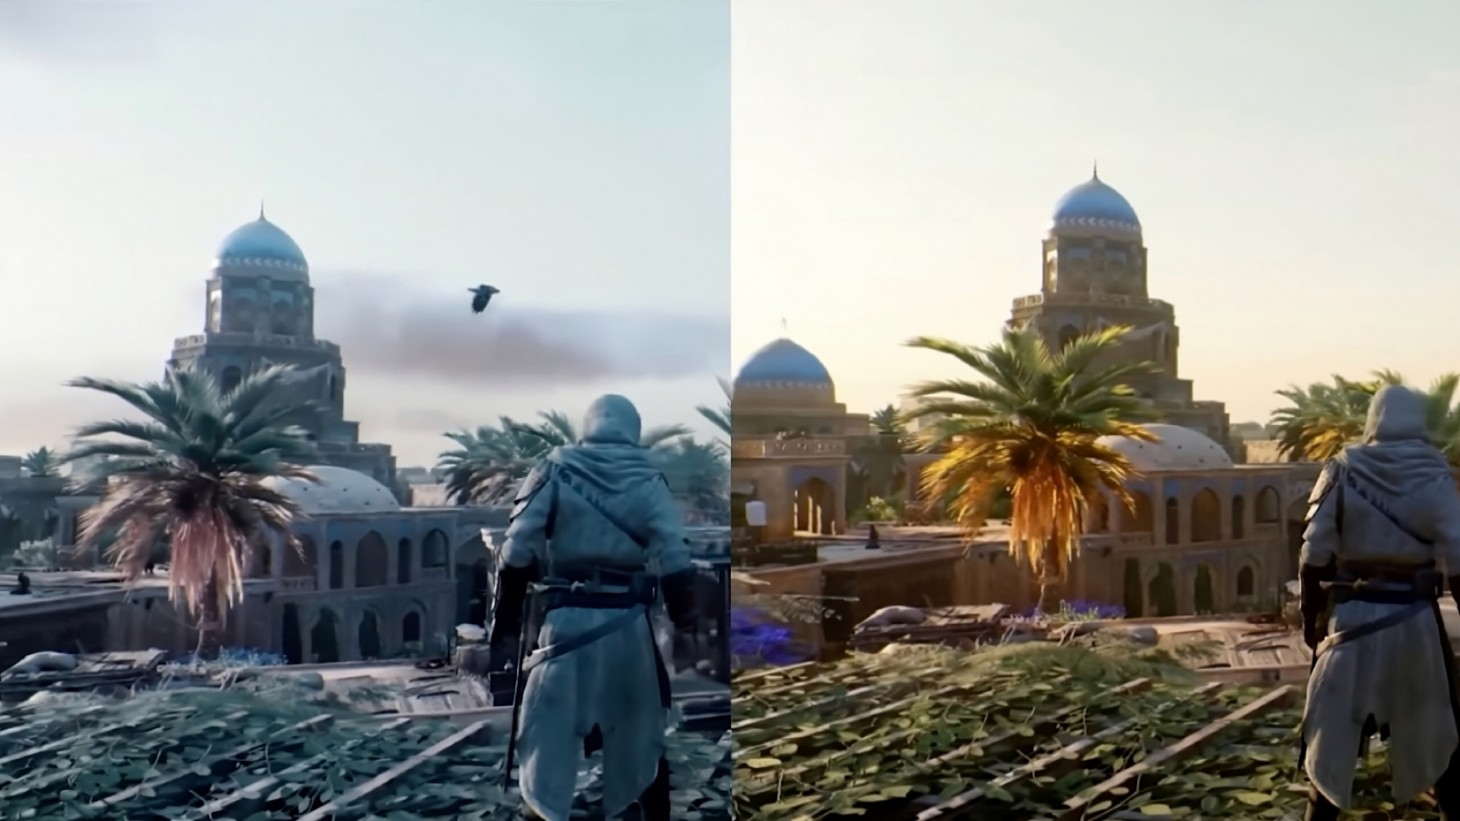 Assassin's Creed Mirage Review: Nostalgia Hits So Good